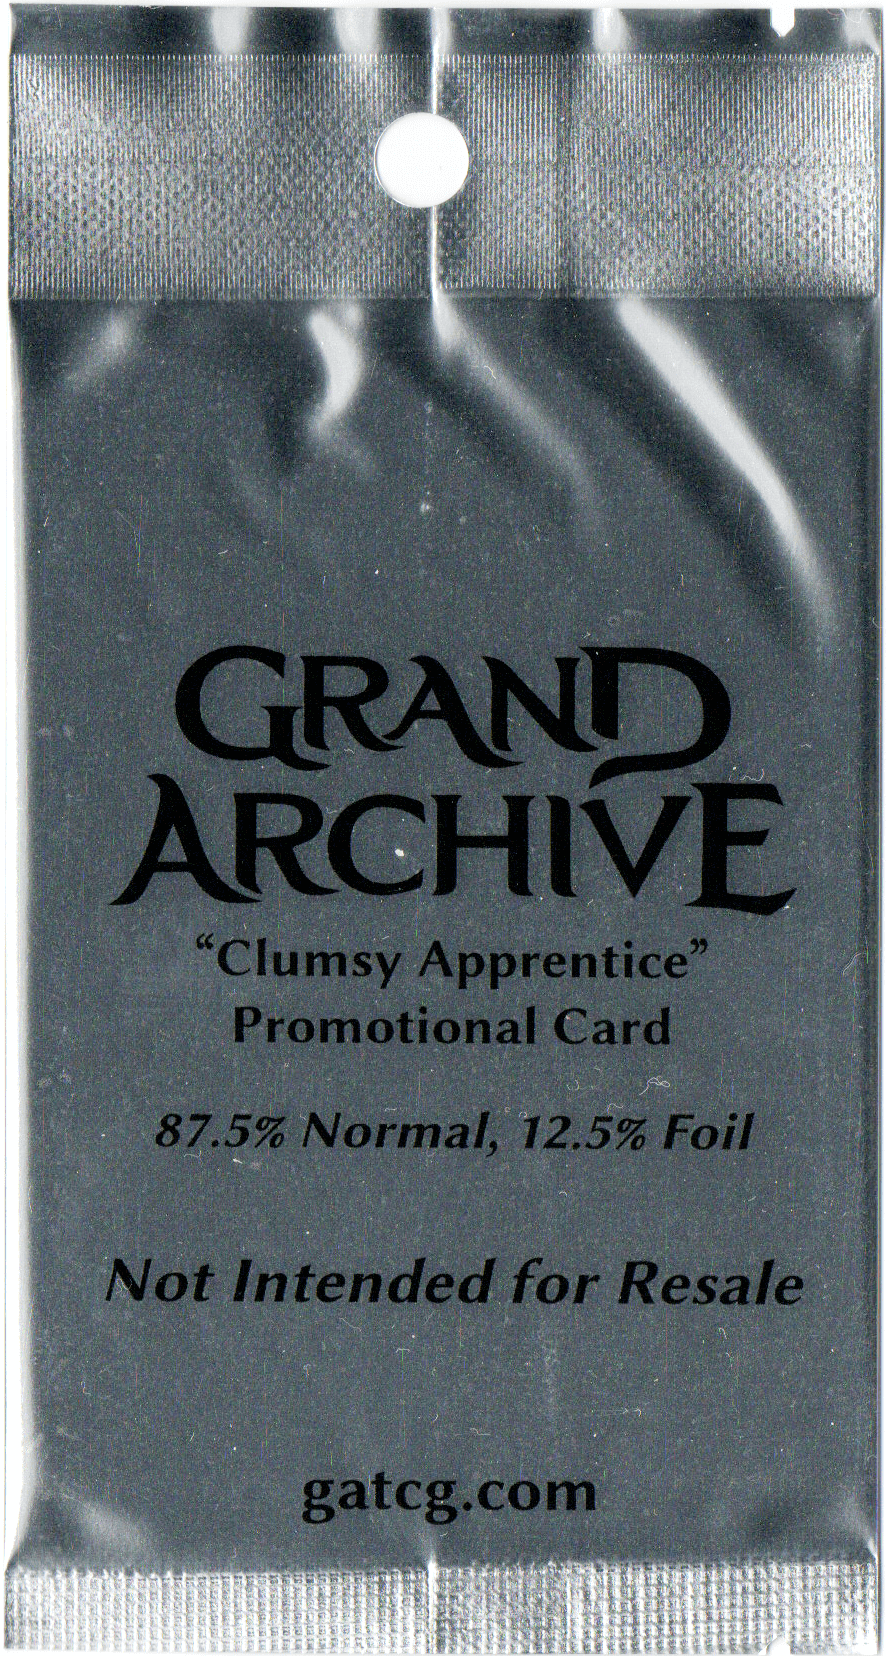 Grand Archive Clumsy Apprentice Promotional Pack scan.